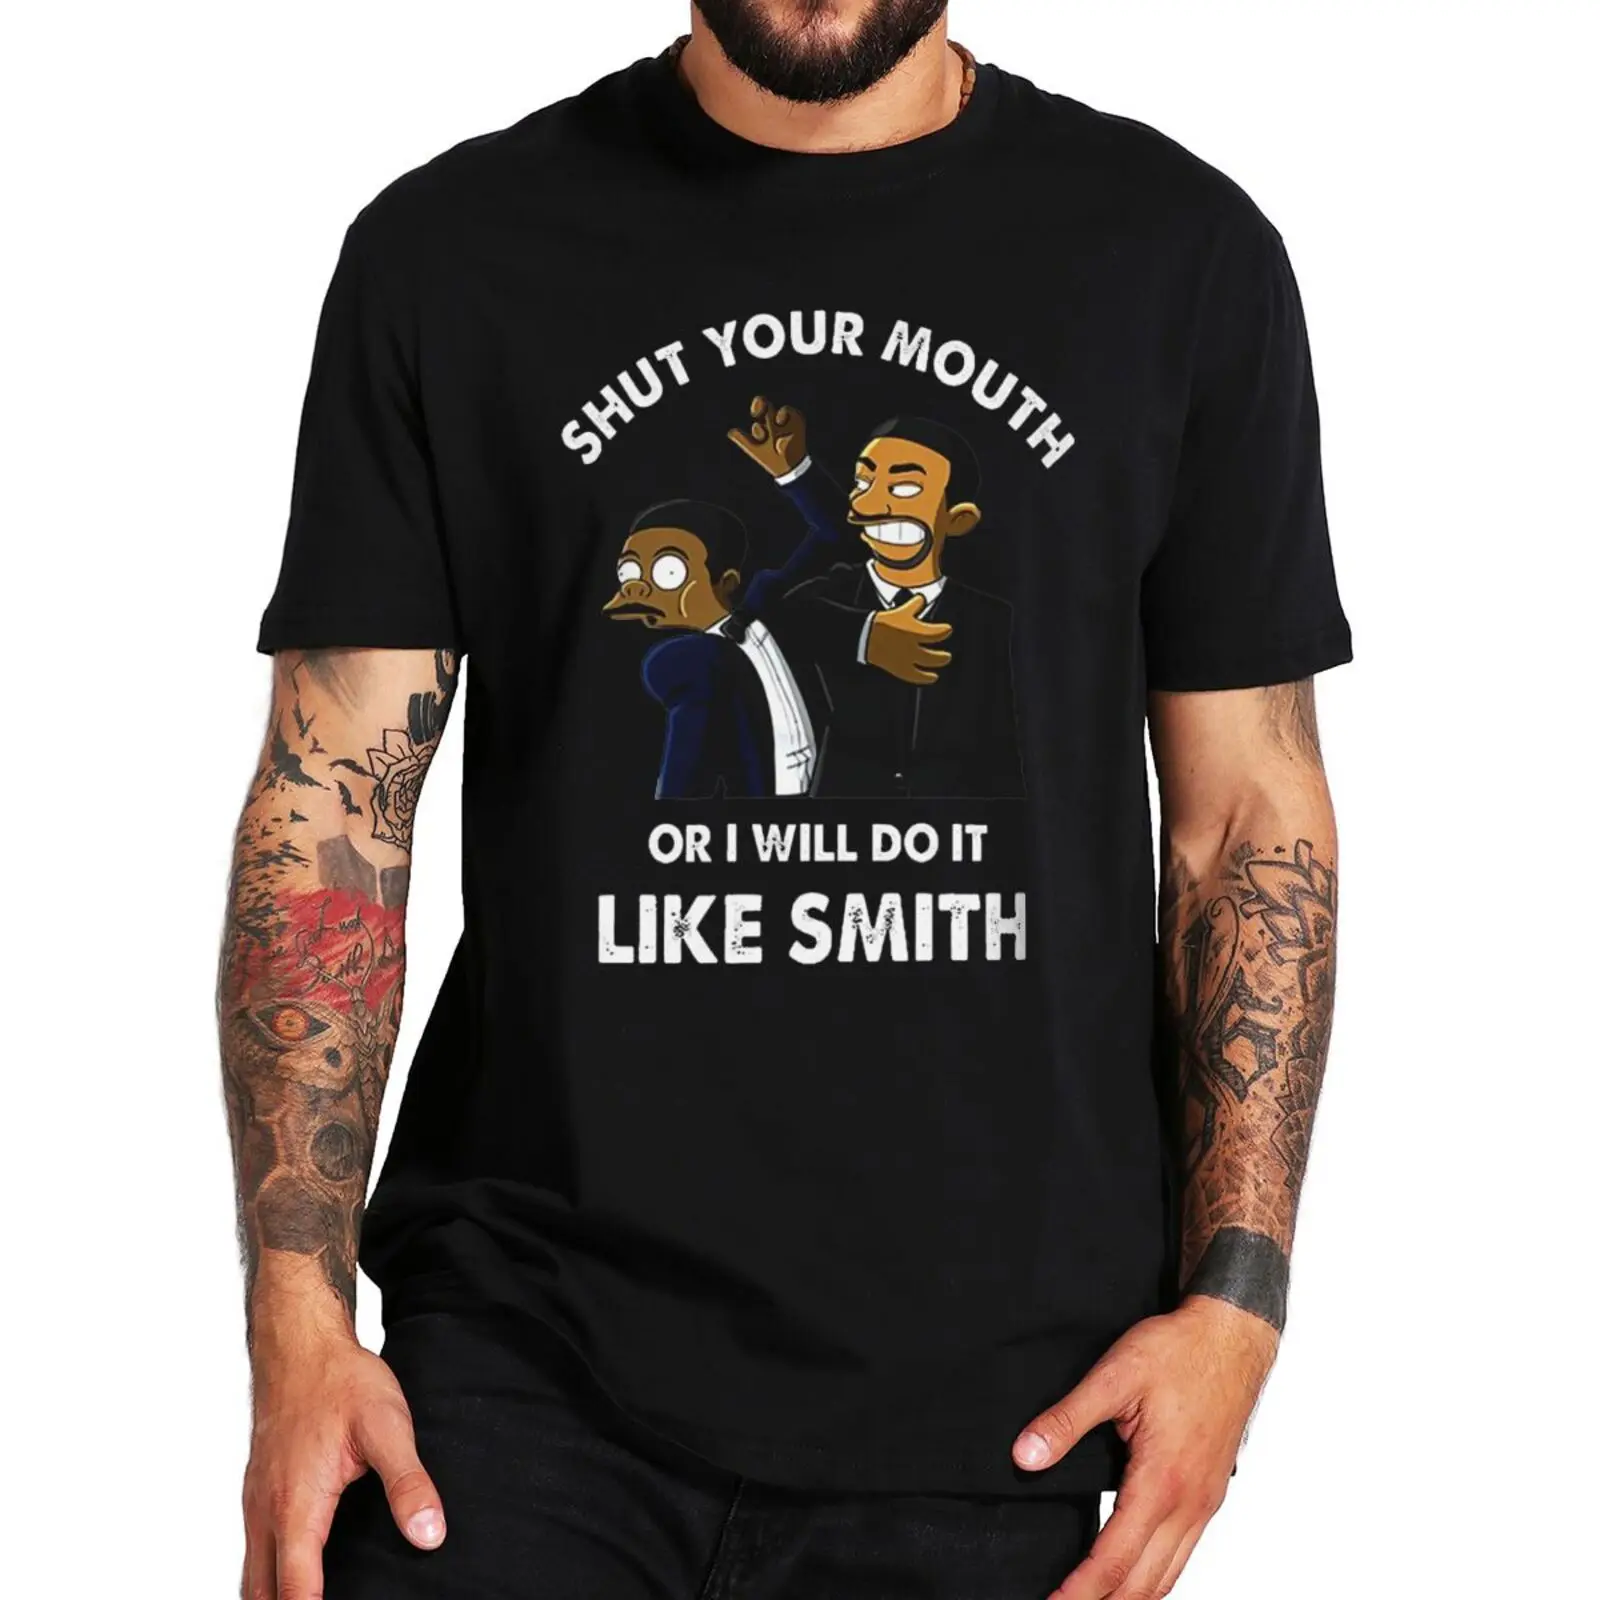 

Shut Your Mouth Or I Will Do It Like T-shirt 2022 Funny Memes Humor Joke T Shirt For Men Casual Cotton Summer Premium Tops